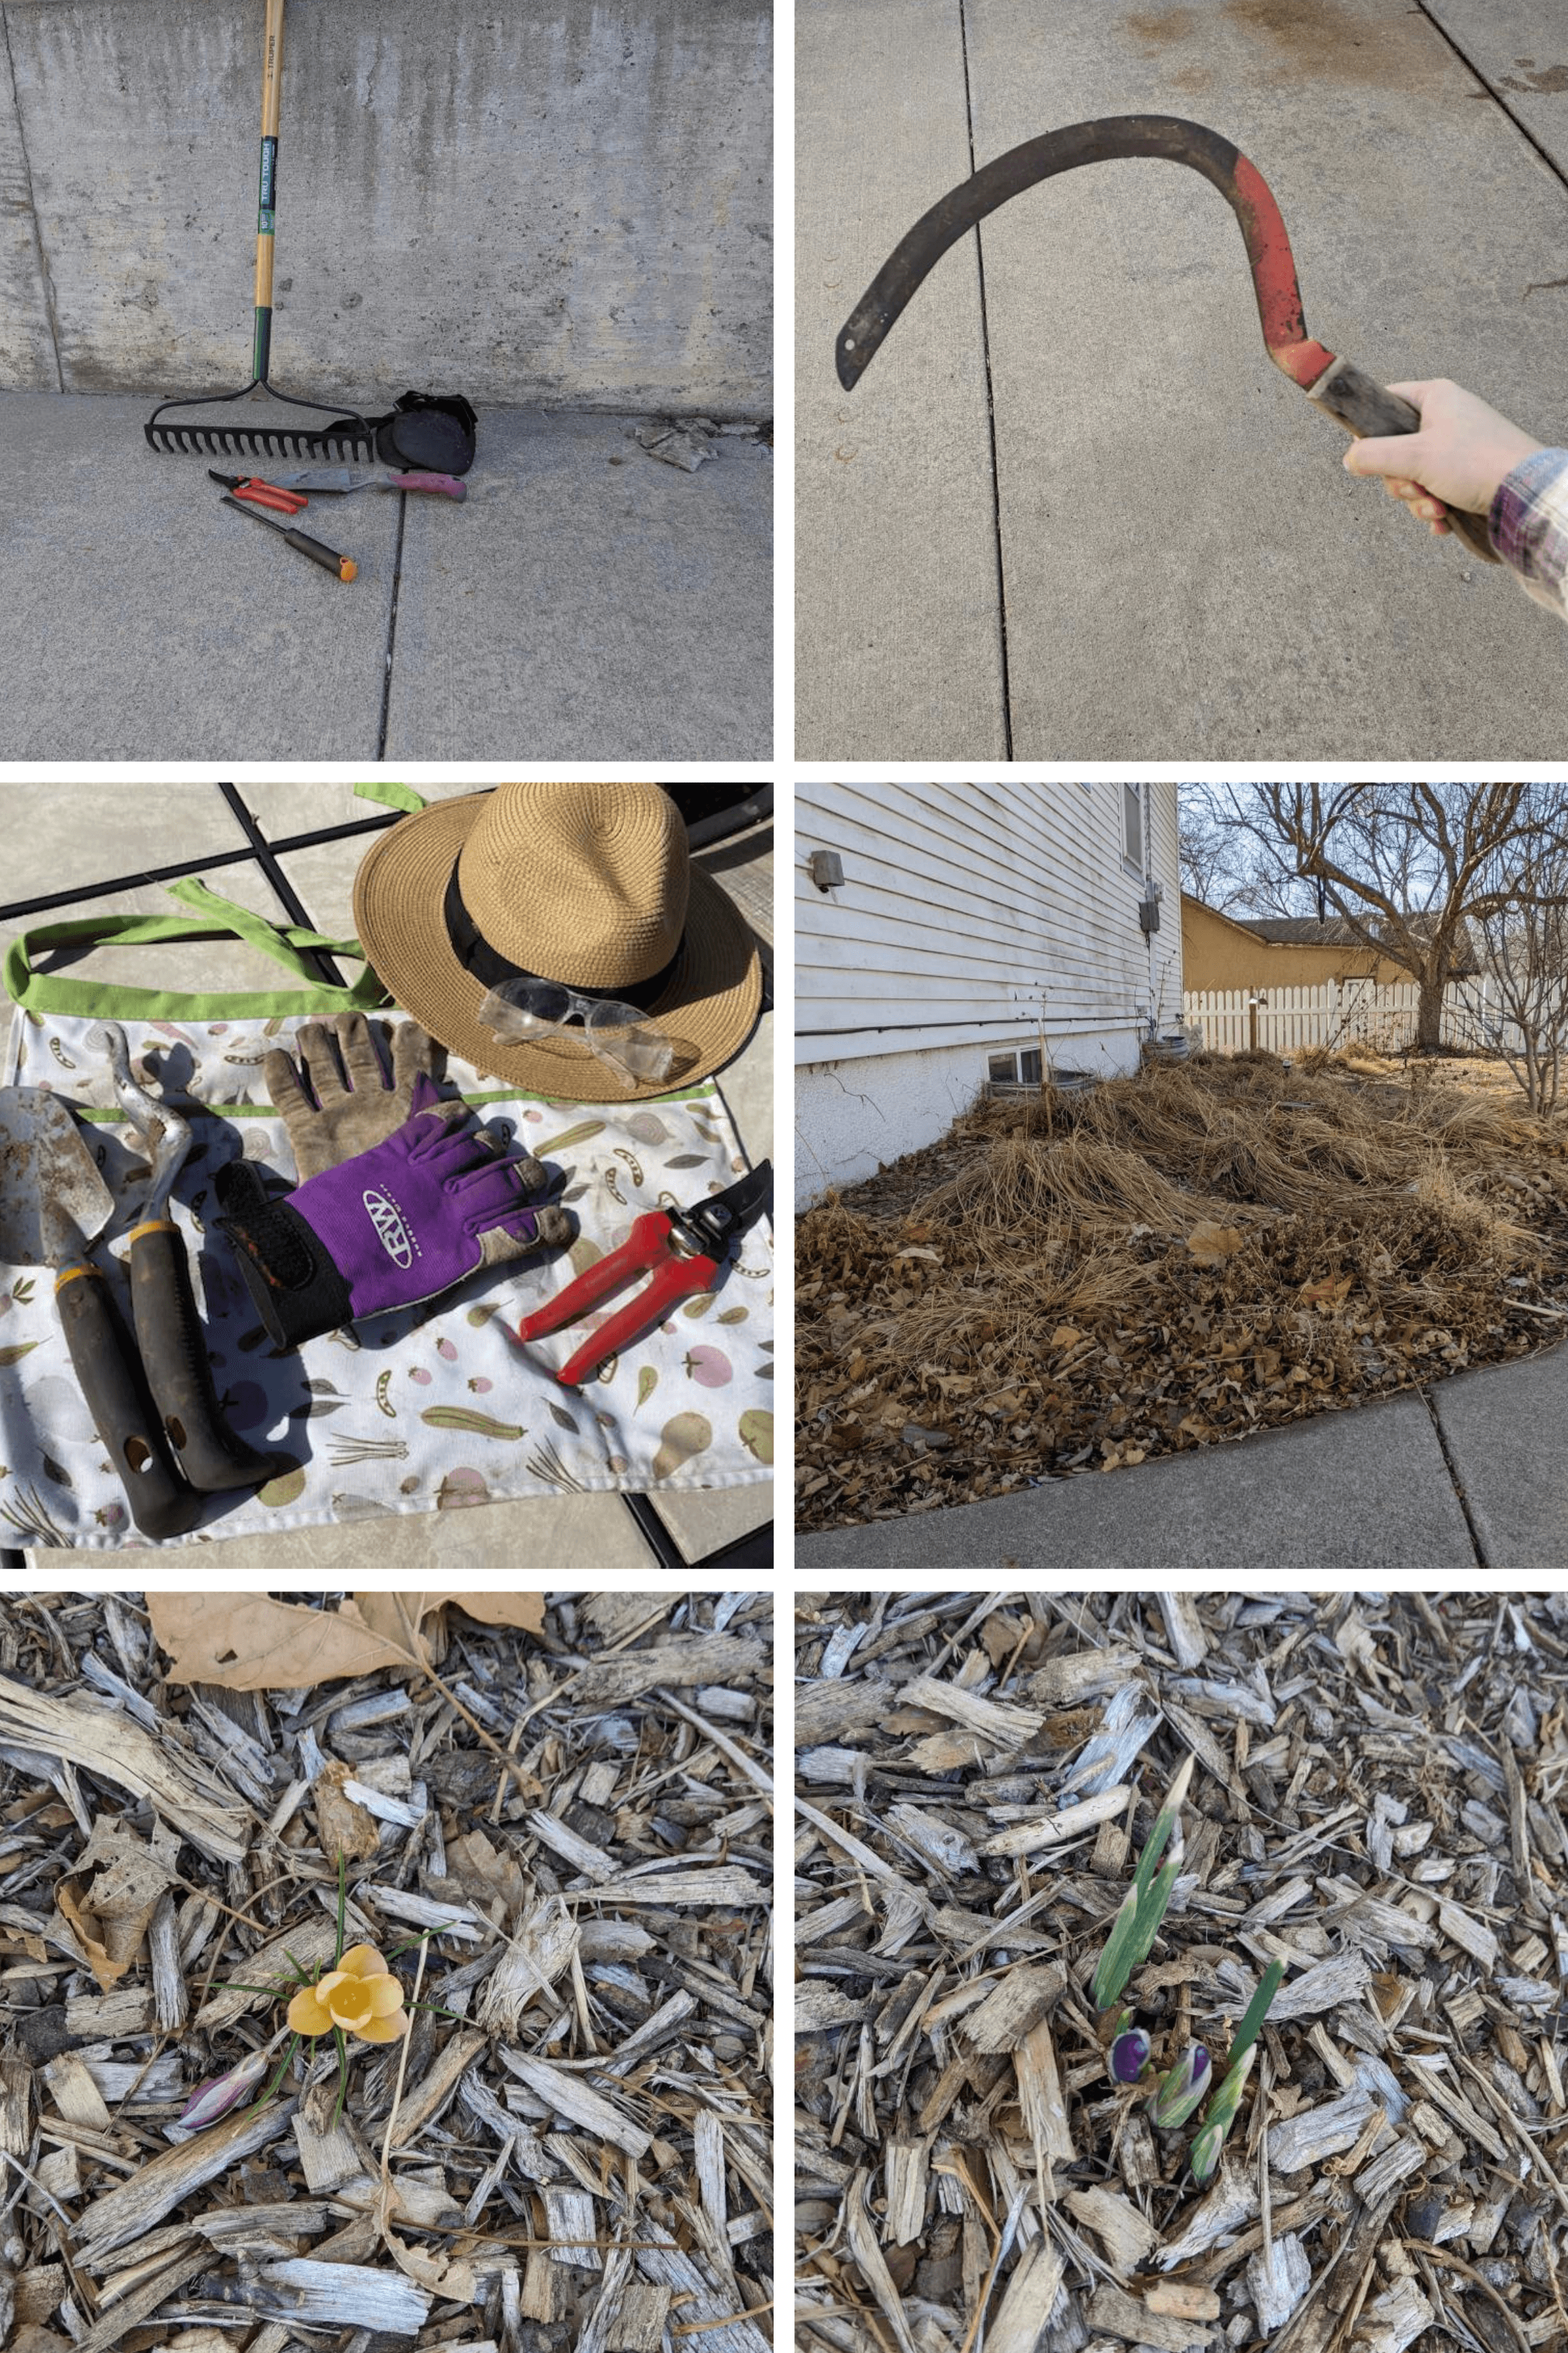 4: Spring Cleanup